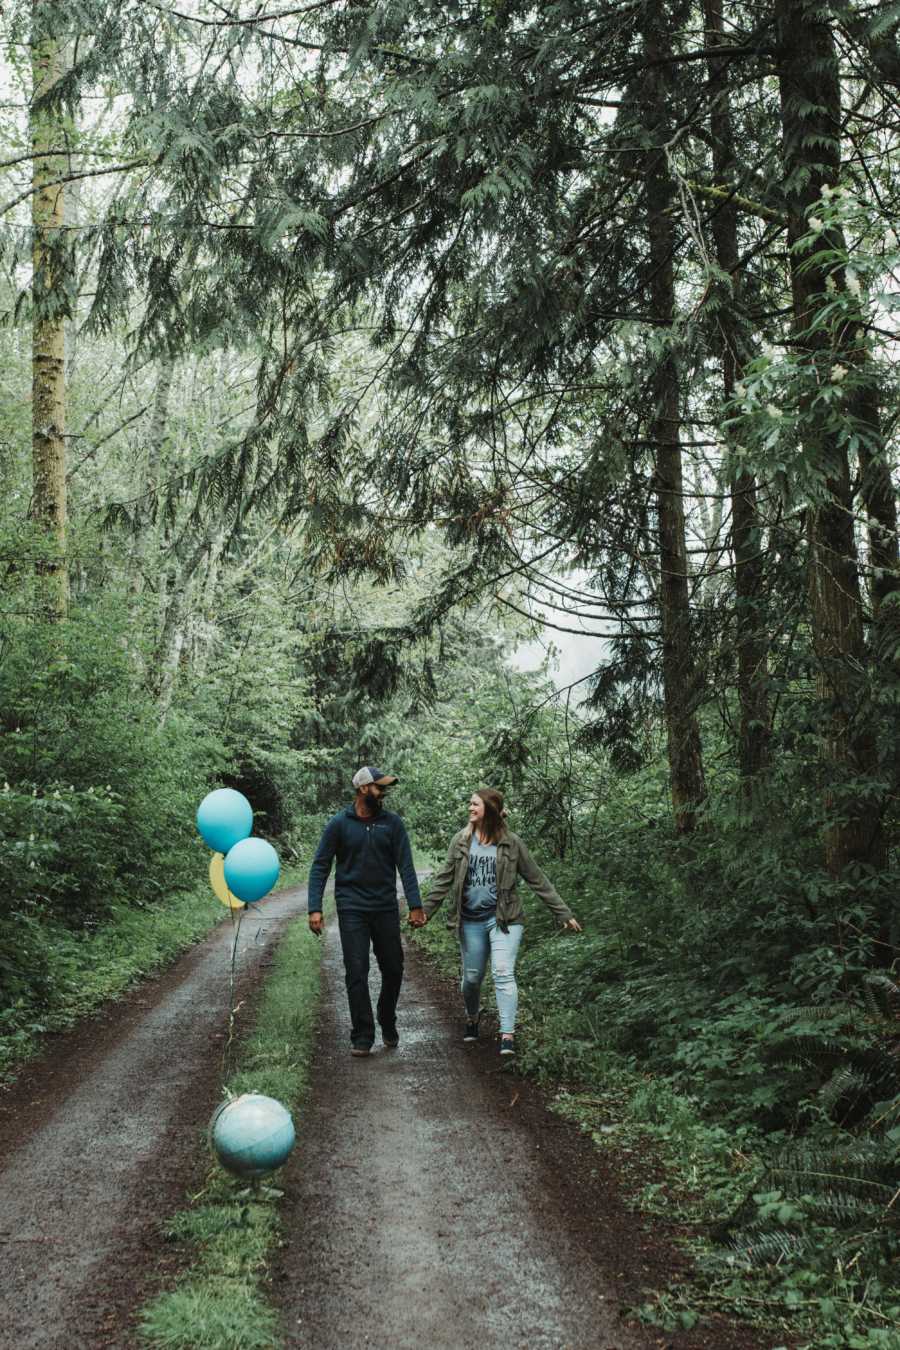 Husband and wife who are adopting a child from India, walk in path in forest with blue balloons